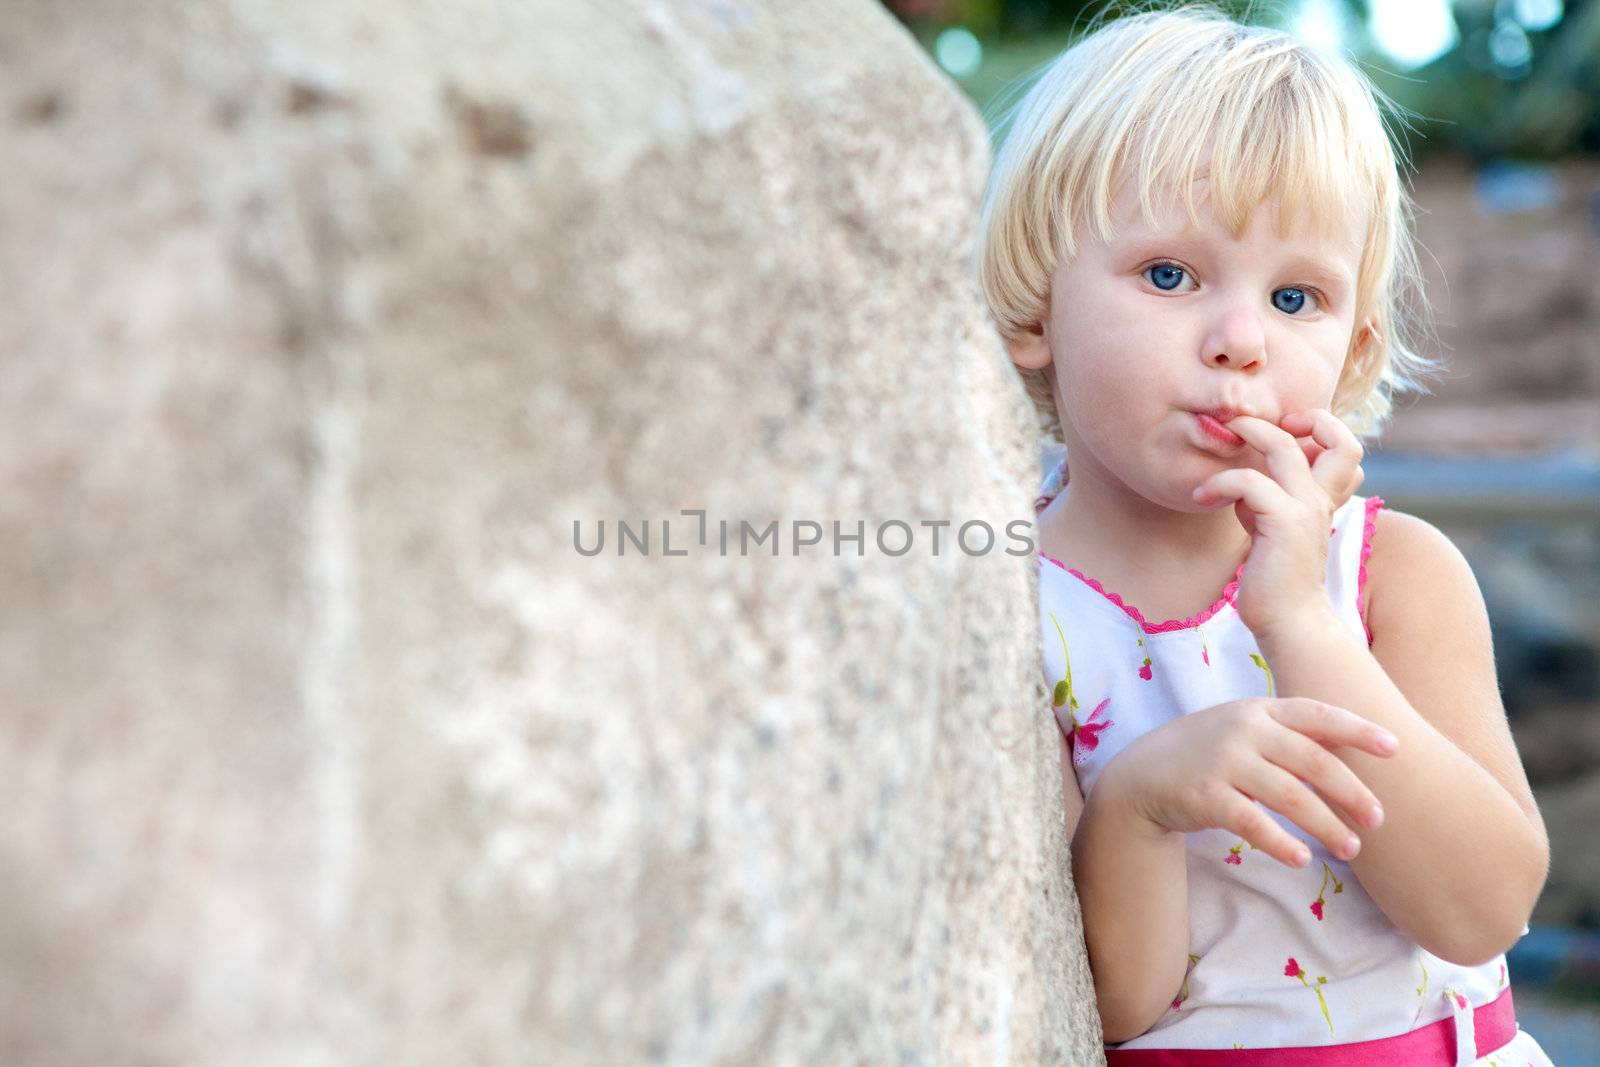 surprised girl sucking finger by the stone